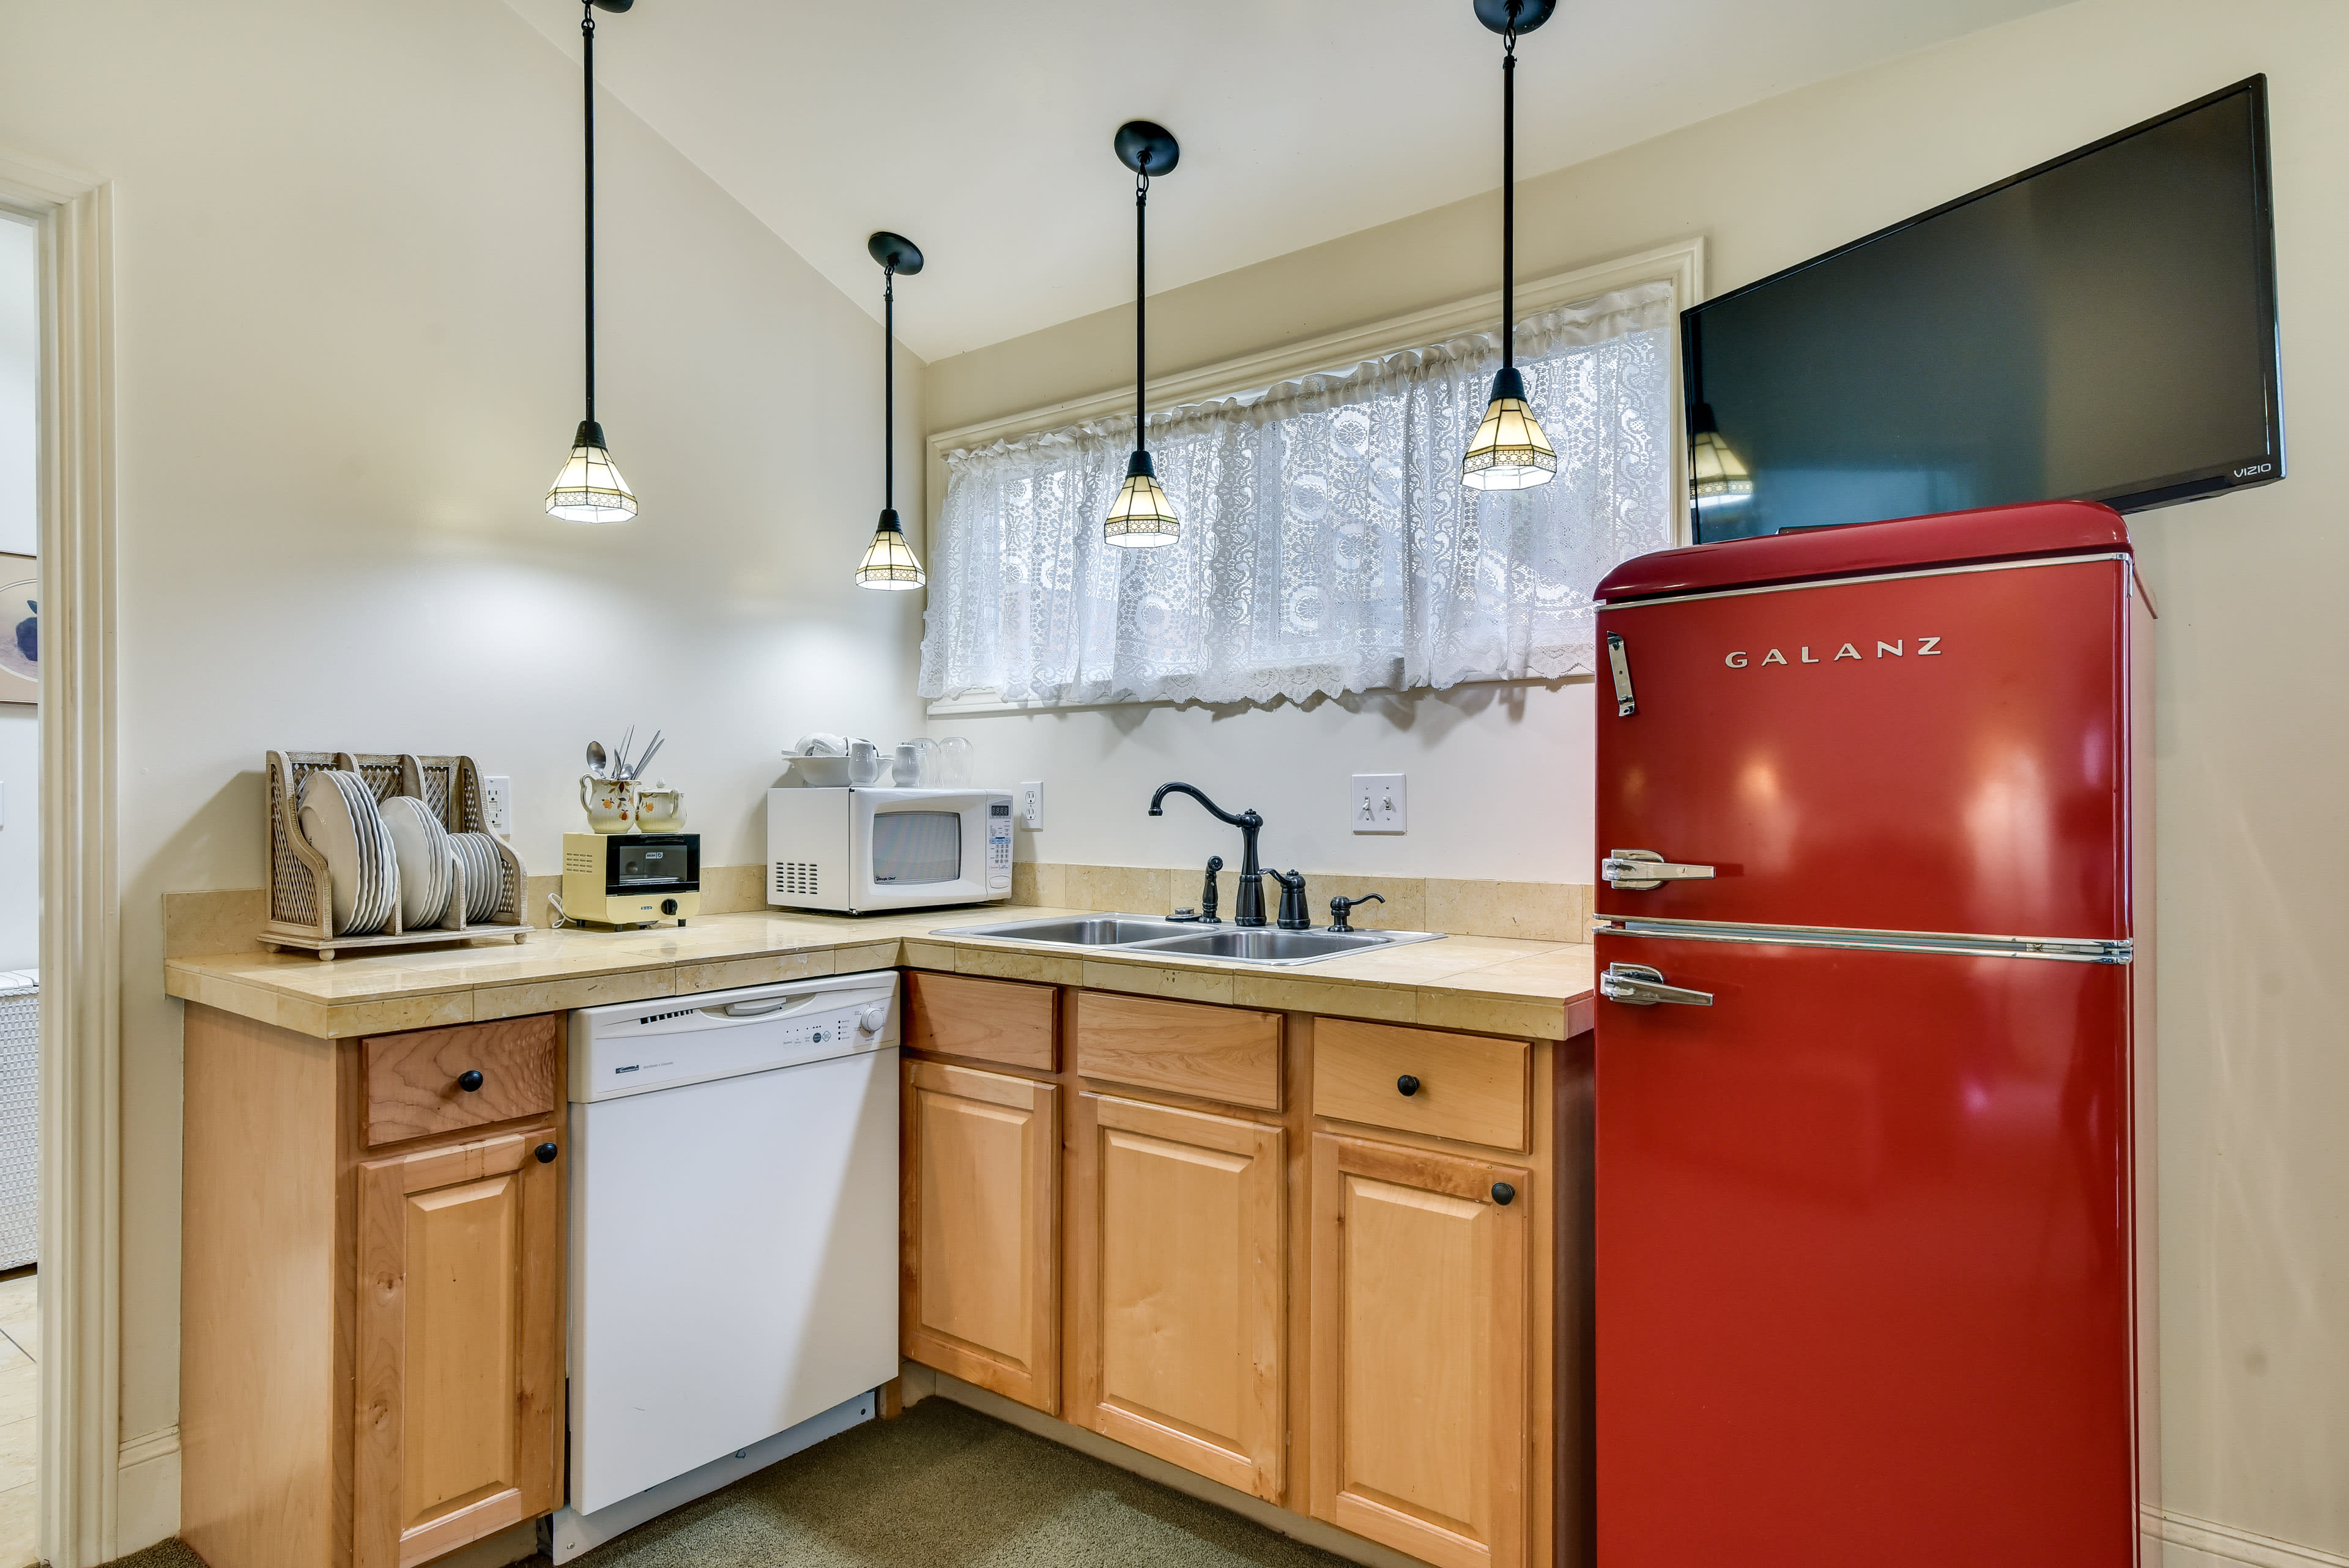 Kitchenette | Free WiFi | Homeowner/Another Vacation Rental On-Site